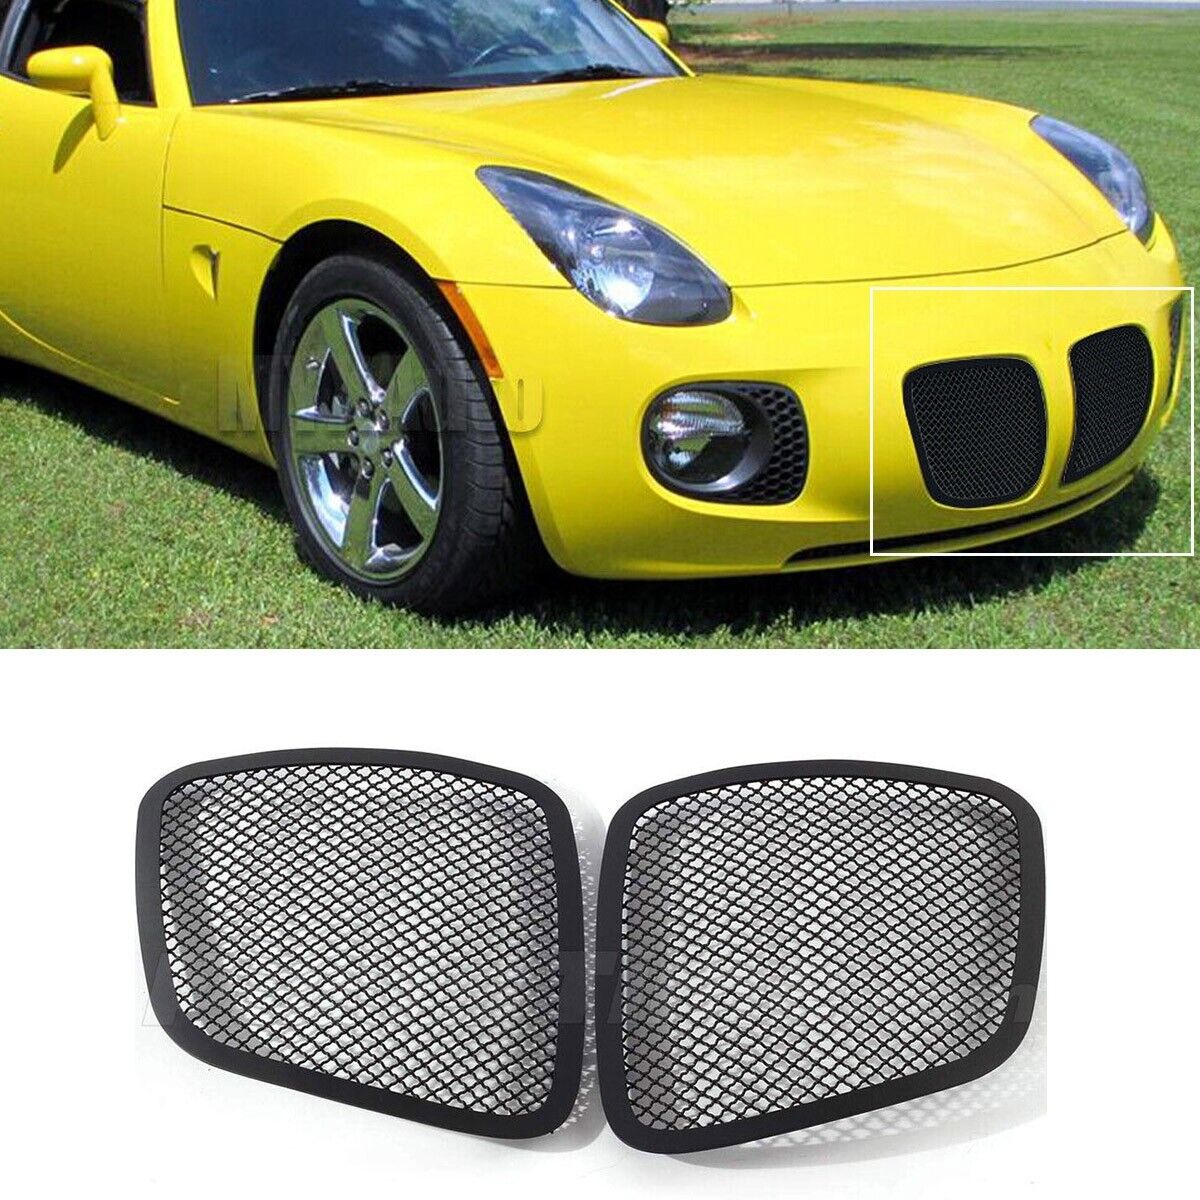 Black Mesh Upper Grille For 2006- 2009 Pontiac Solstice Stainless Steel Grill